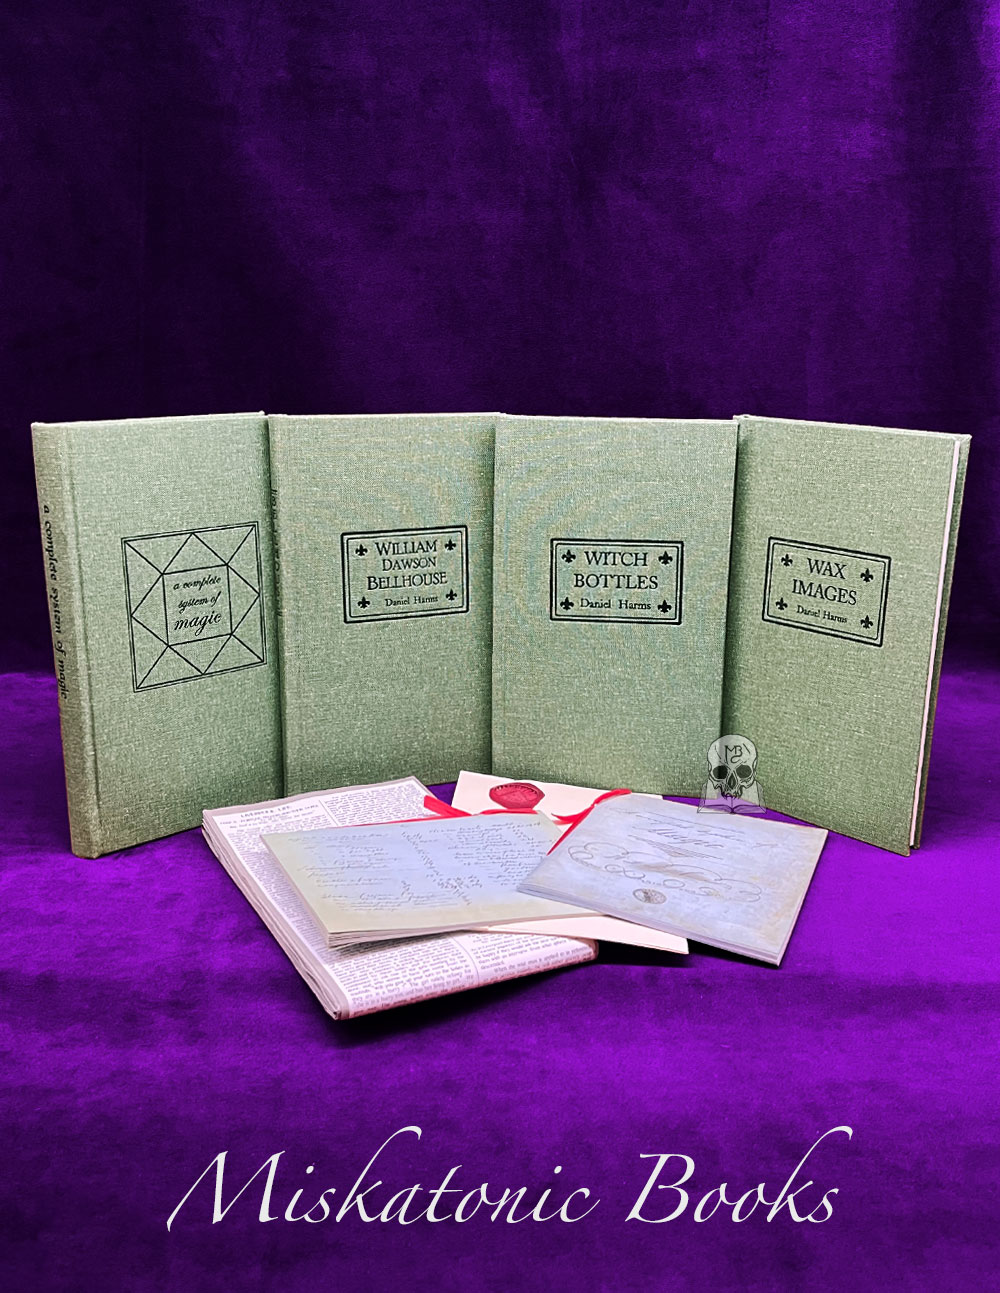 A COMPLETE SYSTEM OF MAGIC by William Dawson Bellhouse, LIMITED, Society of Esoteric Endeavour (Five Volume Set in Custom Slipcase with many extras, Limited Edition Hardcover)